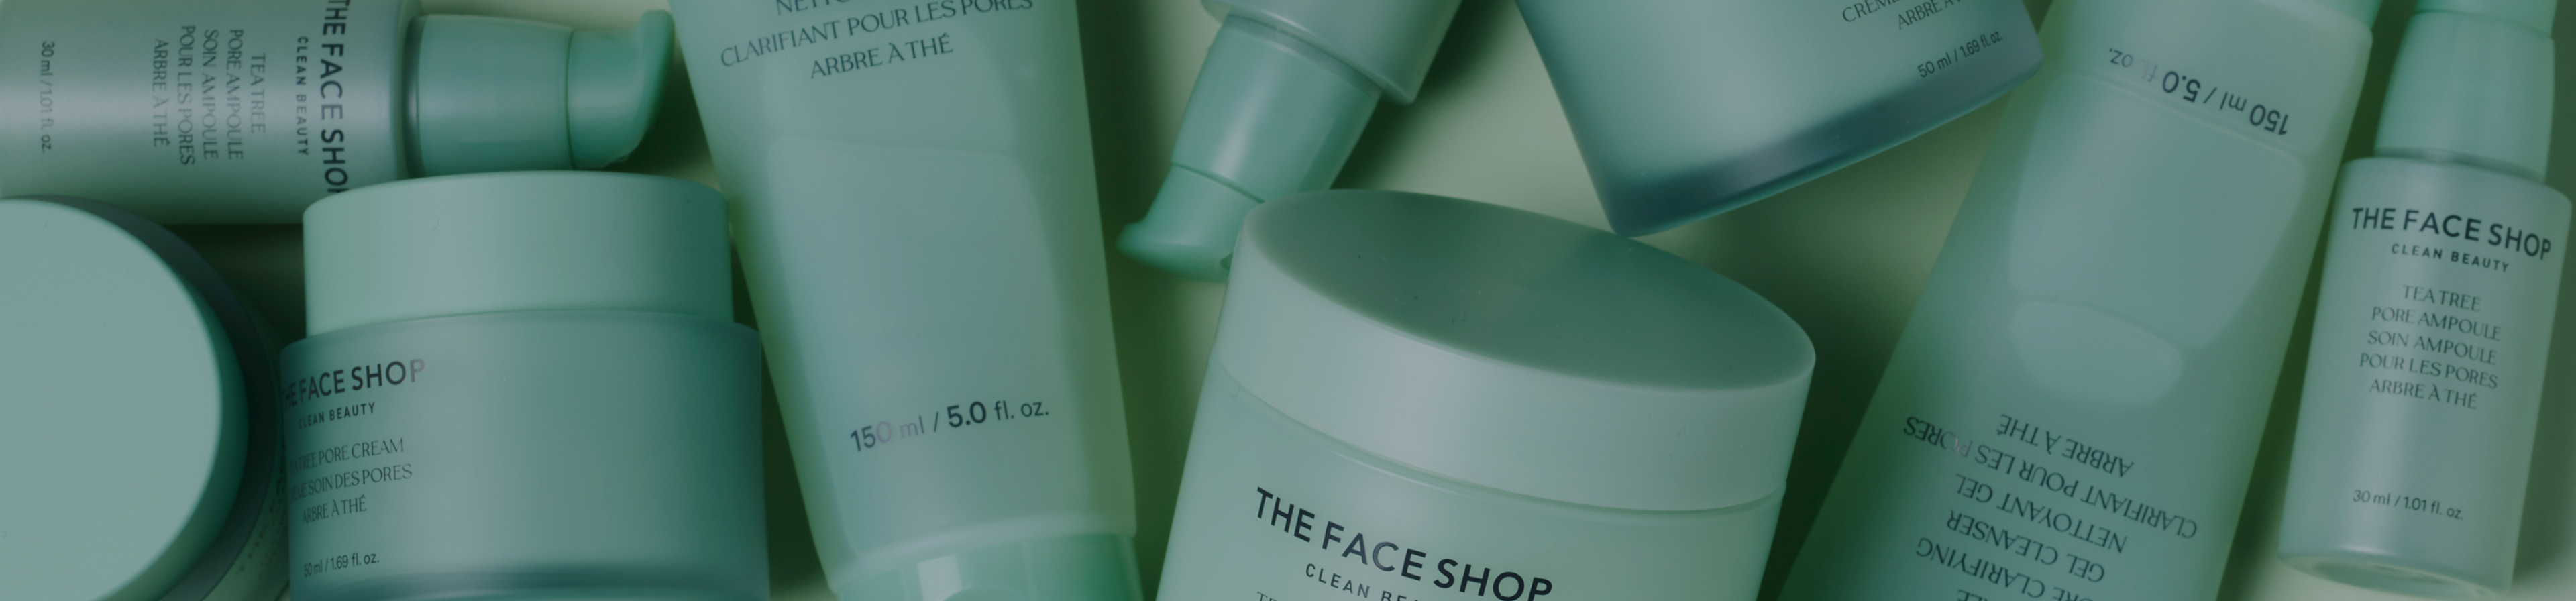 A bunch of light green jars and tubes of The Face Shop products lying around